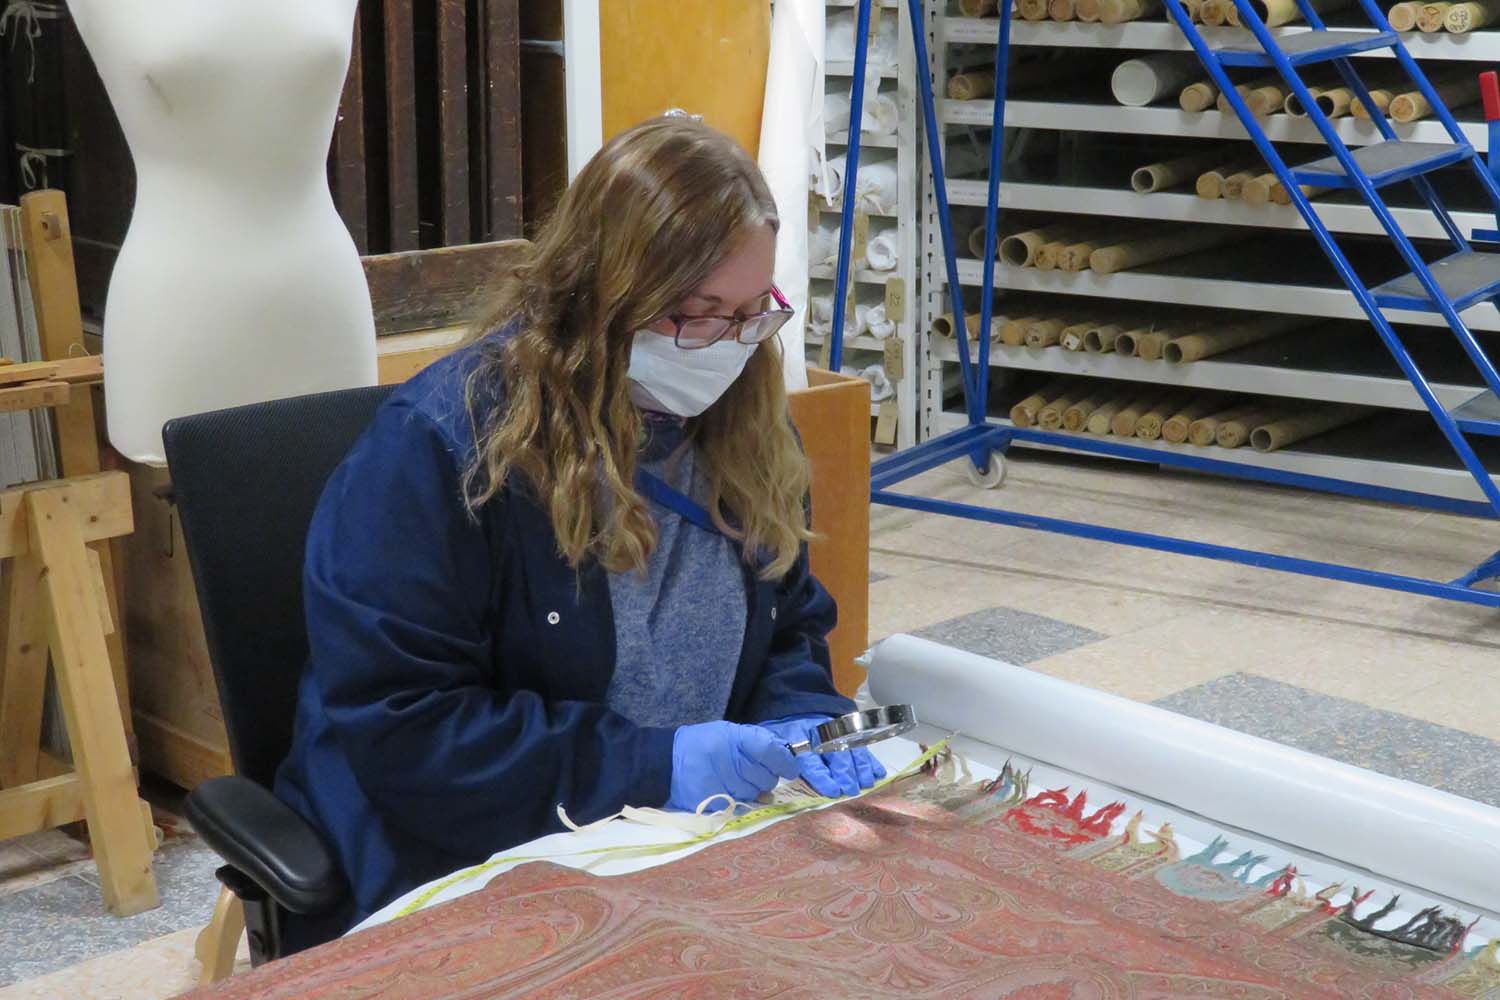 Paisley Shawl conservation assessment